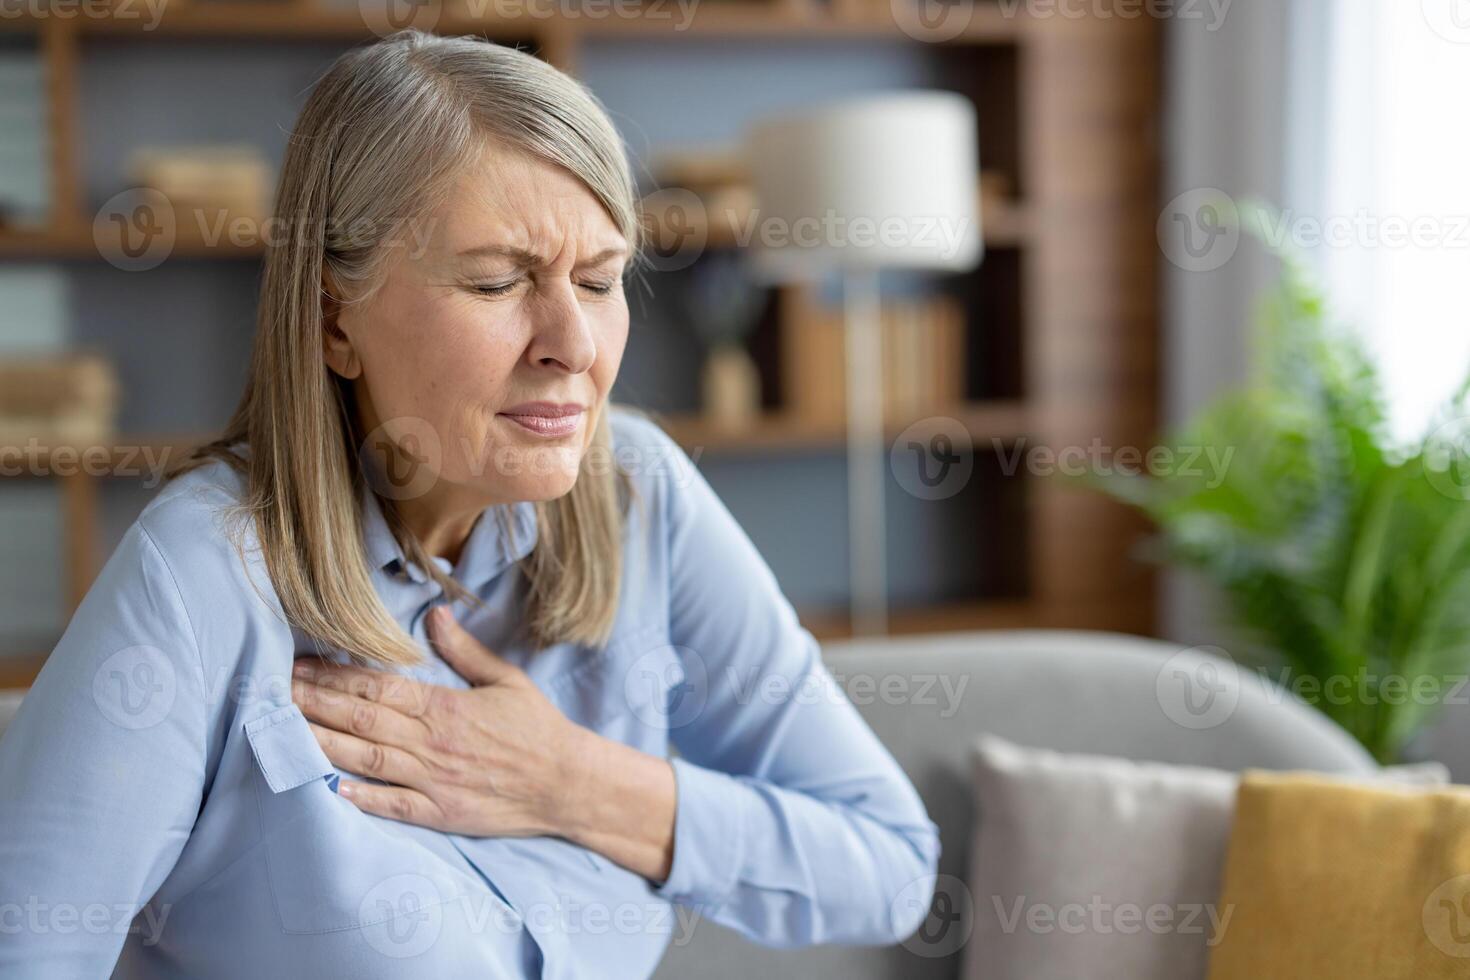 Mature woman experiencing discomfort and holding her chest due to pain. She seems anxious and worried, possibly indicating a health issue. photo